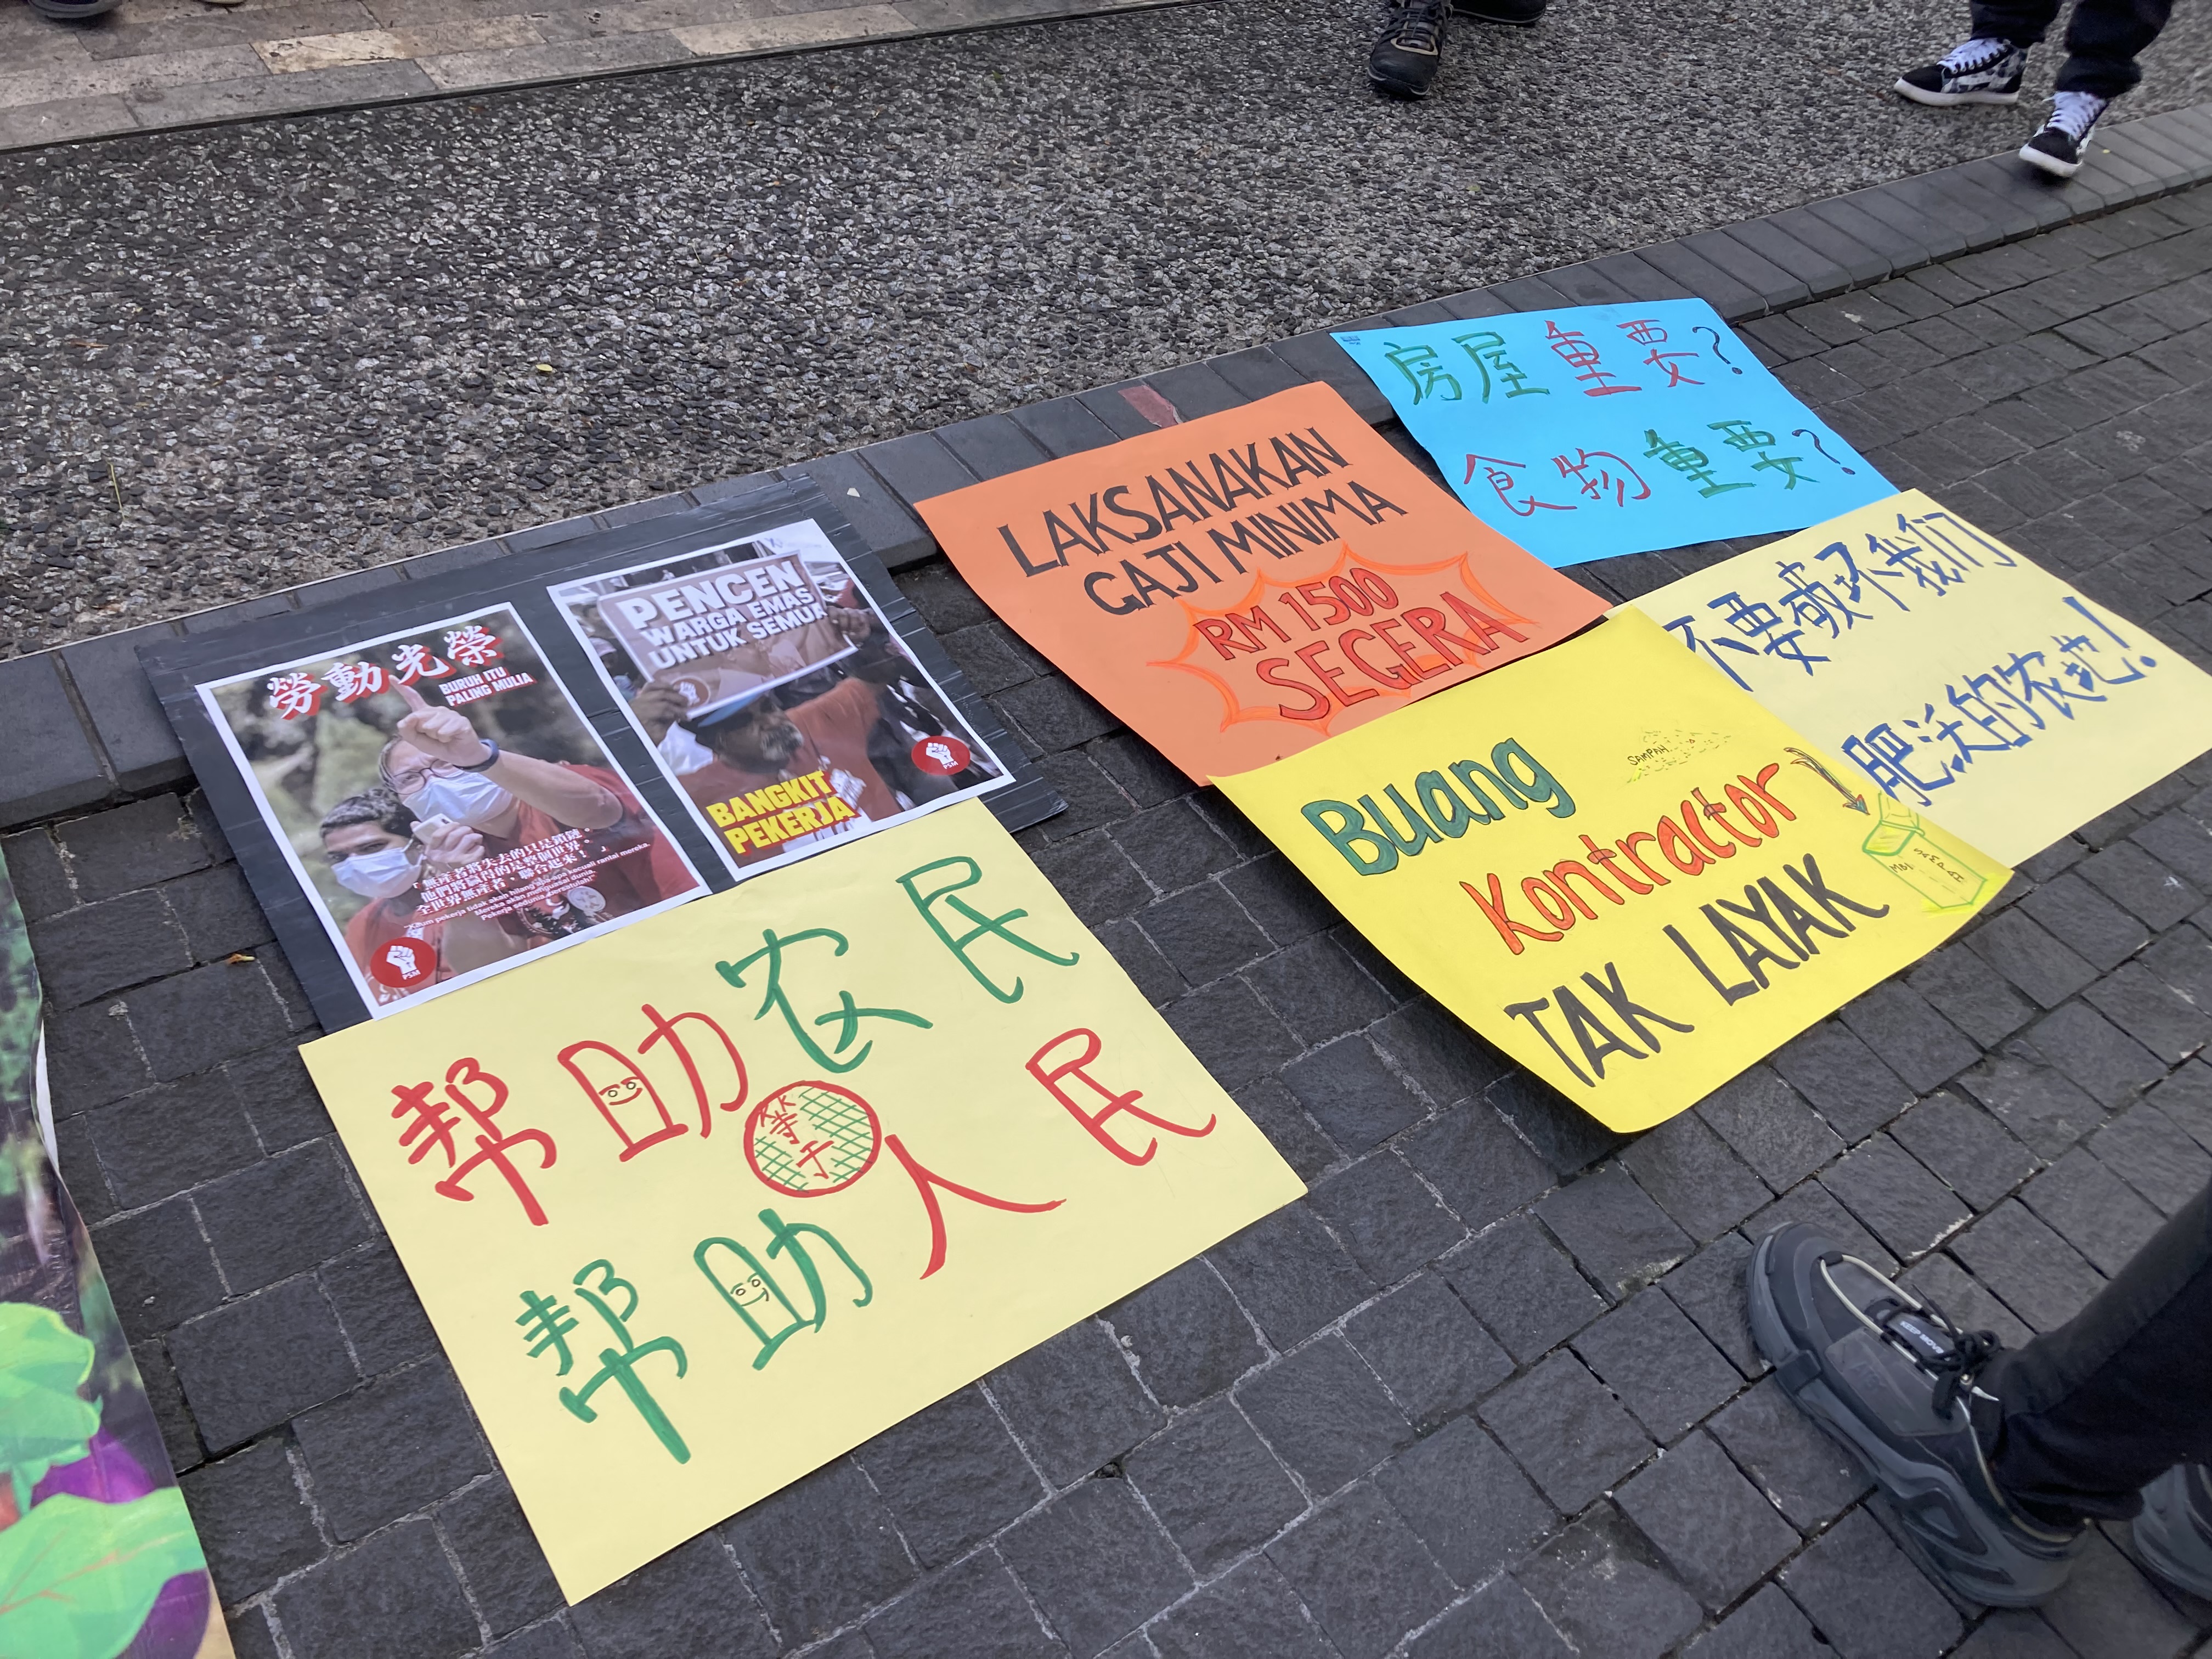 Handmade signs advocate in Chinese for the rights of rural workers, reading “Helping farmers equals helping the people” and “Is housing important? Is food important?” and “Don’t destroy our fertile farmland!” 